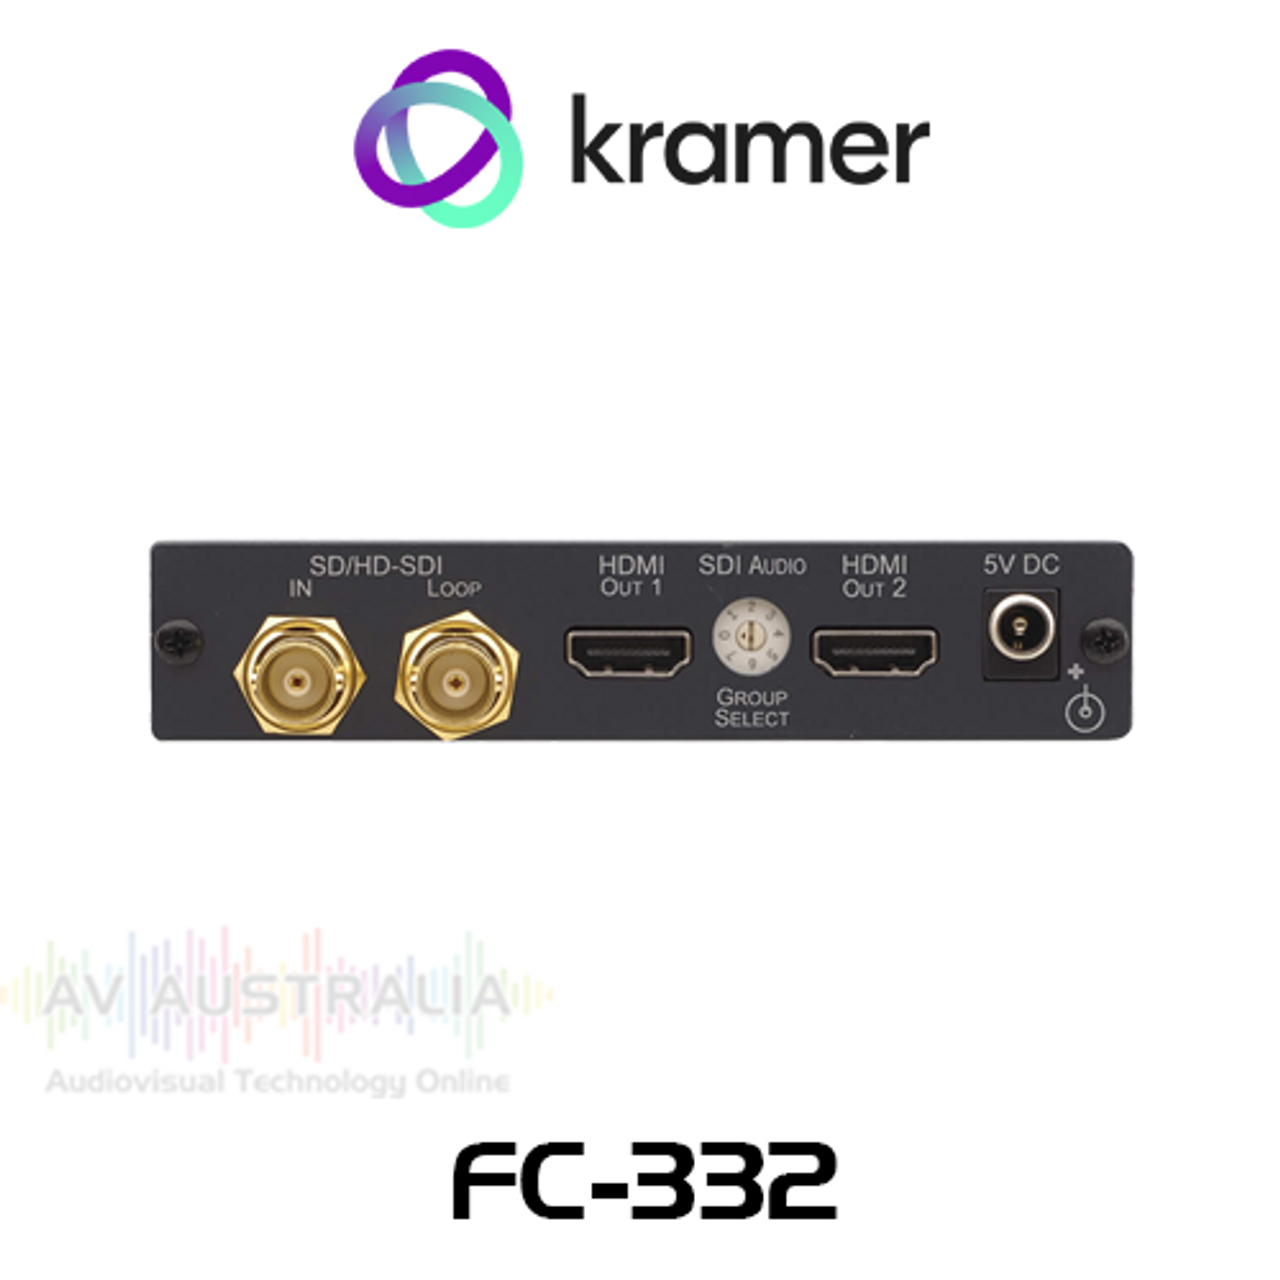 Kramer FC-332 3G HD-SDI to HDMI Converter with Two HDMI Outputs